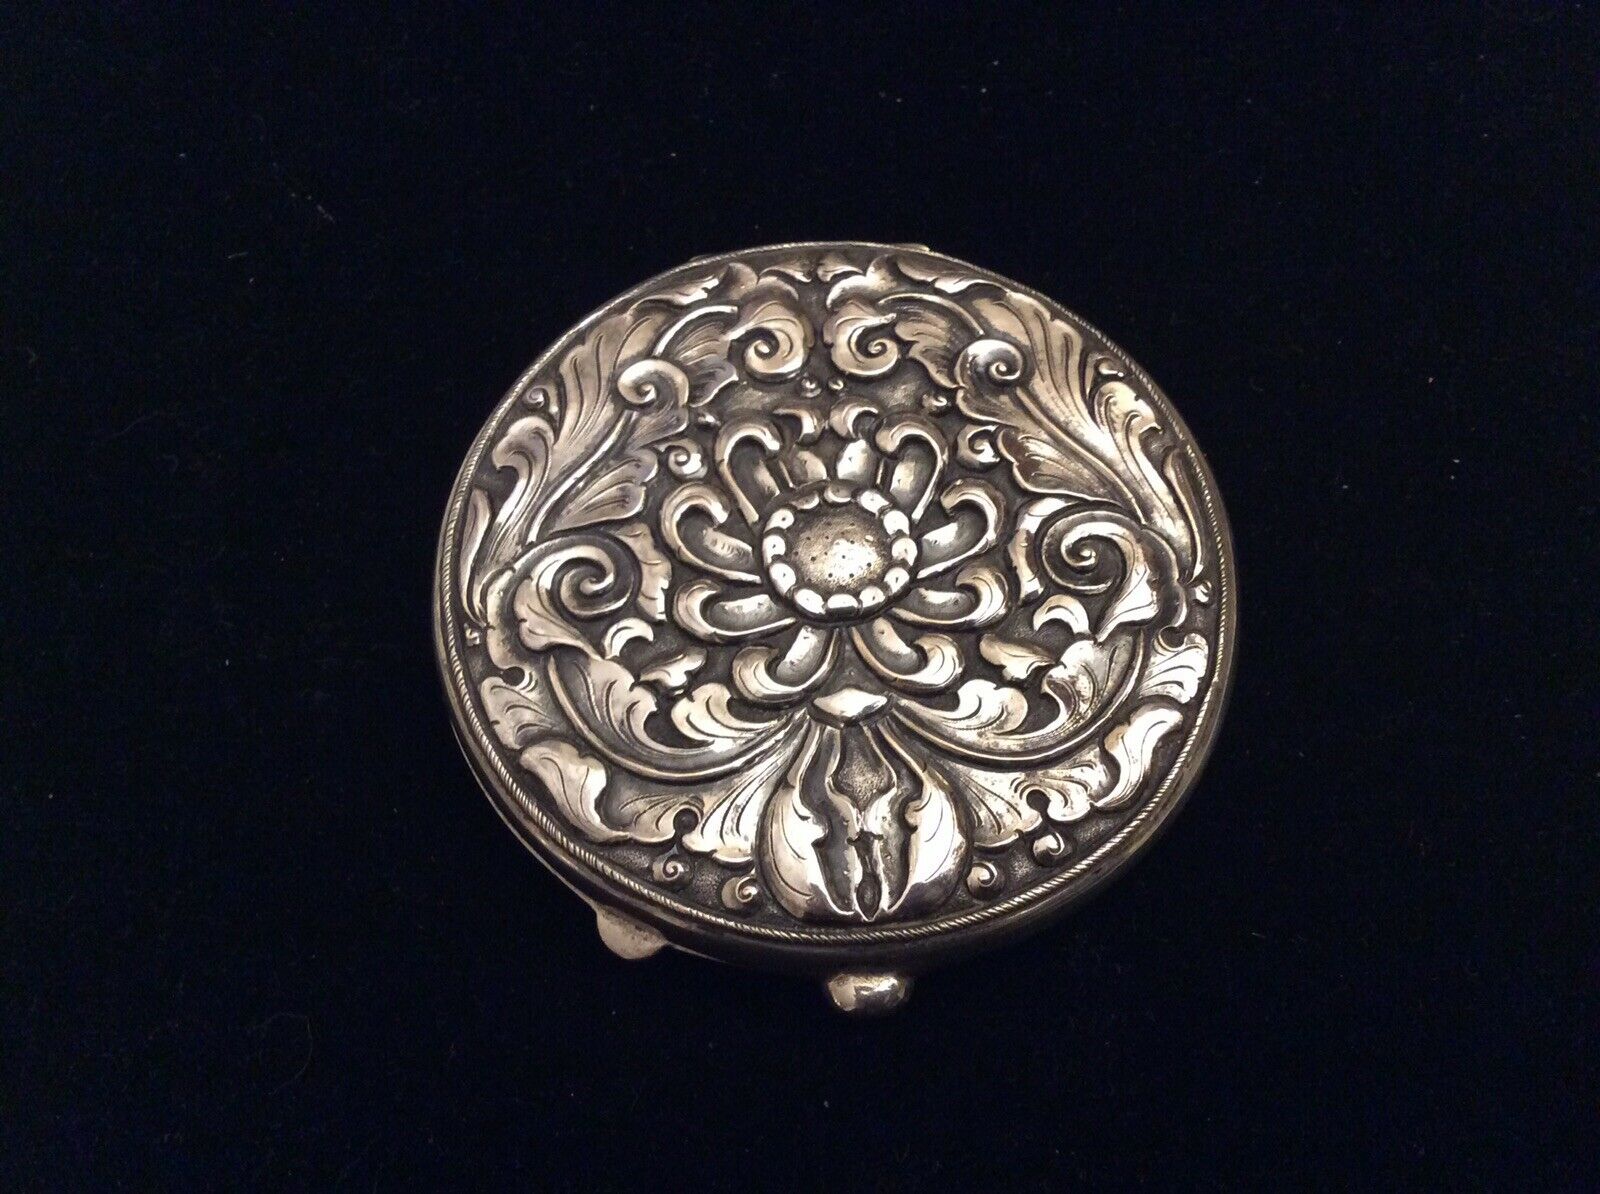 Vintage Repousse, Hammered 800 Silver Powder Compact Flowers, Scrolling Leaves